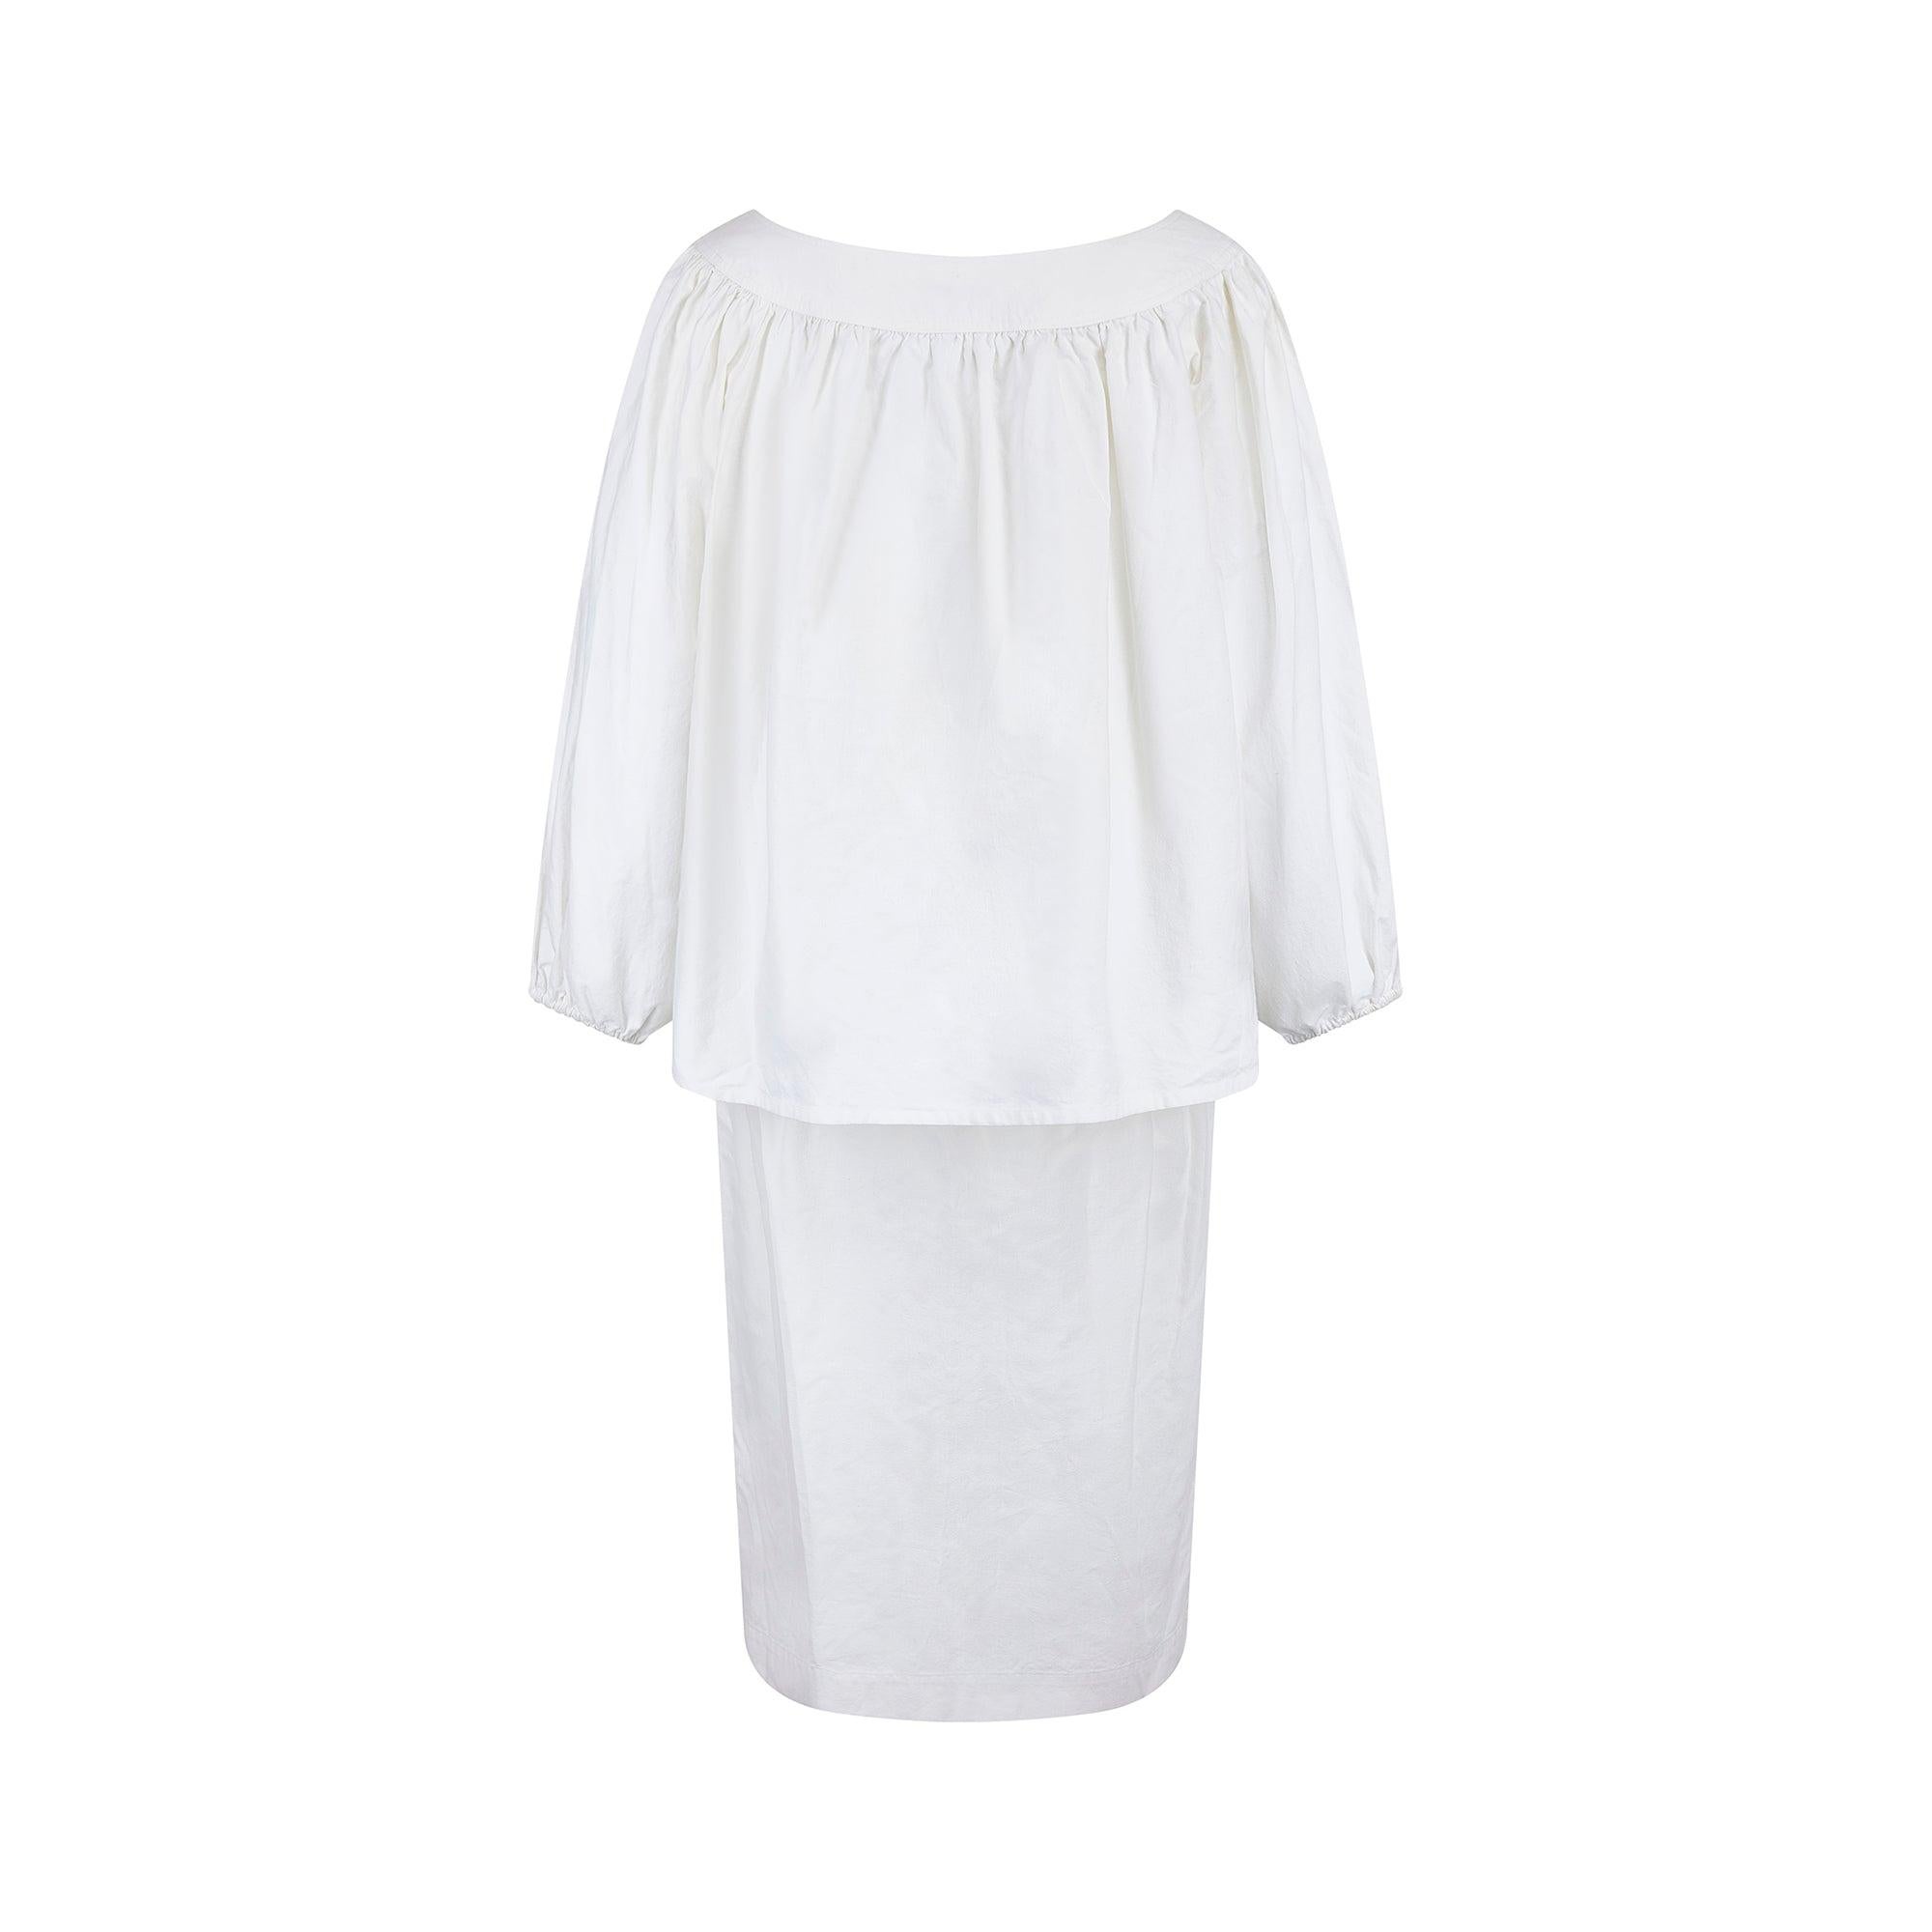 1975 Yves Saint Laurent Runway White Cotton Skirt and Top Set In Excellent Condition For Sale In London, GB